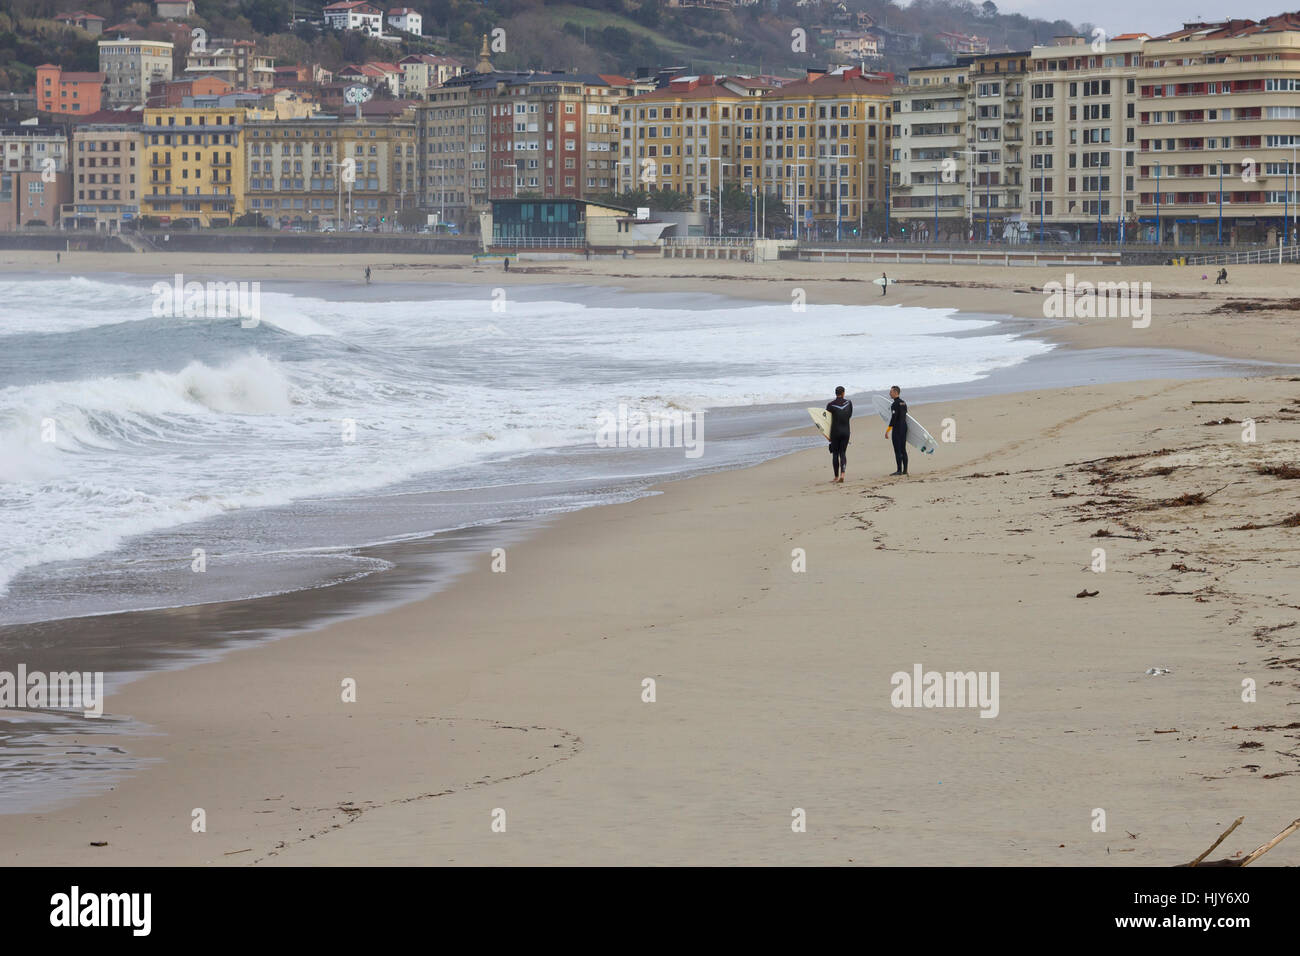 Two surfers at the shore (Donostia, 2017). Stock Photo